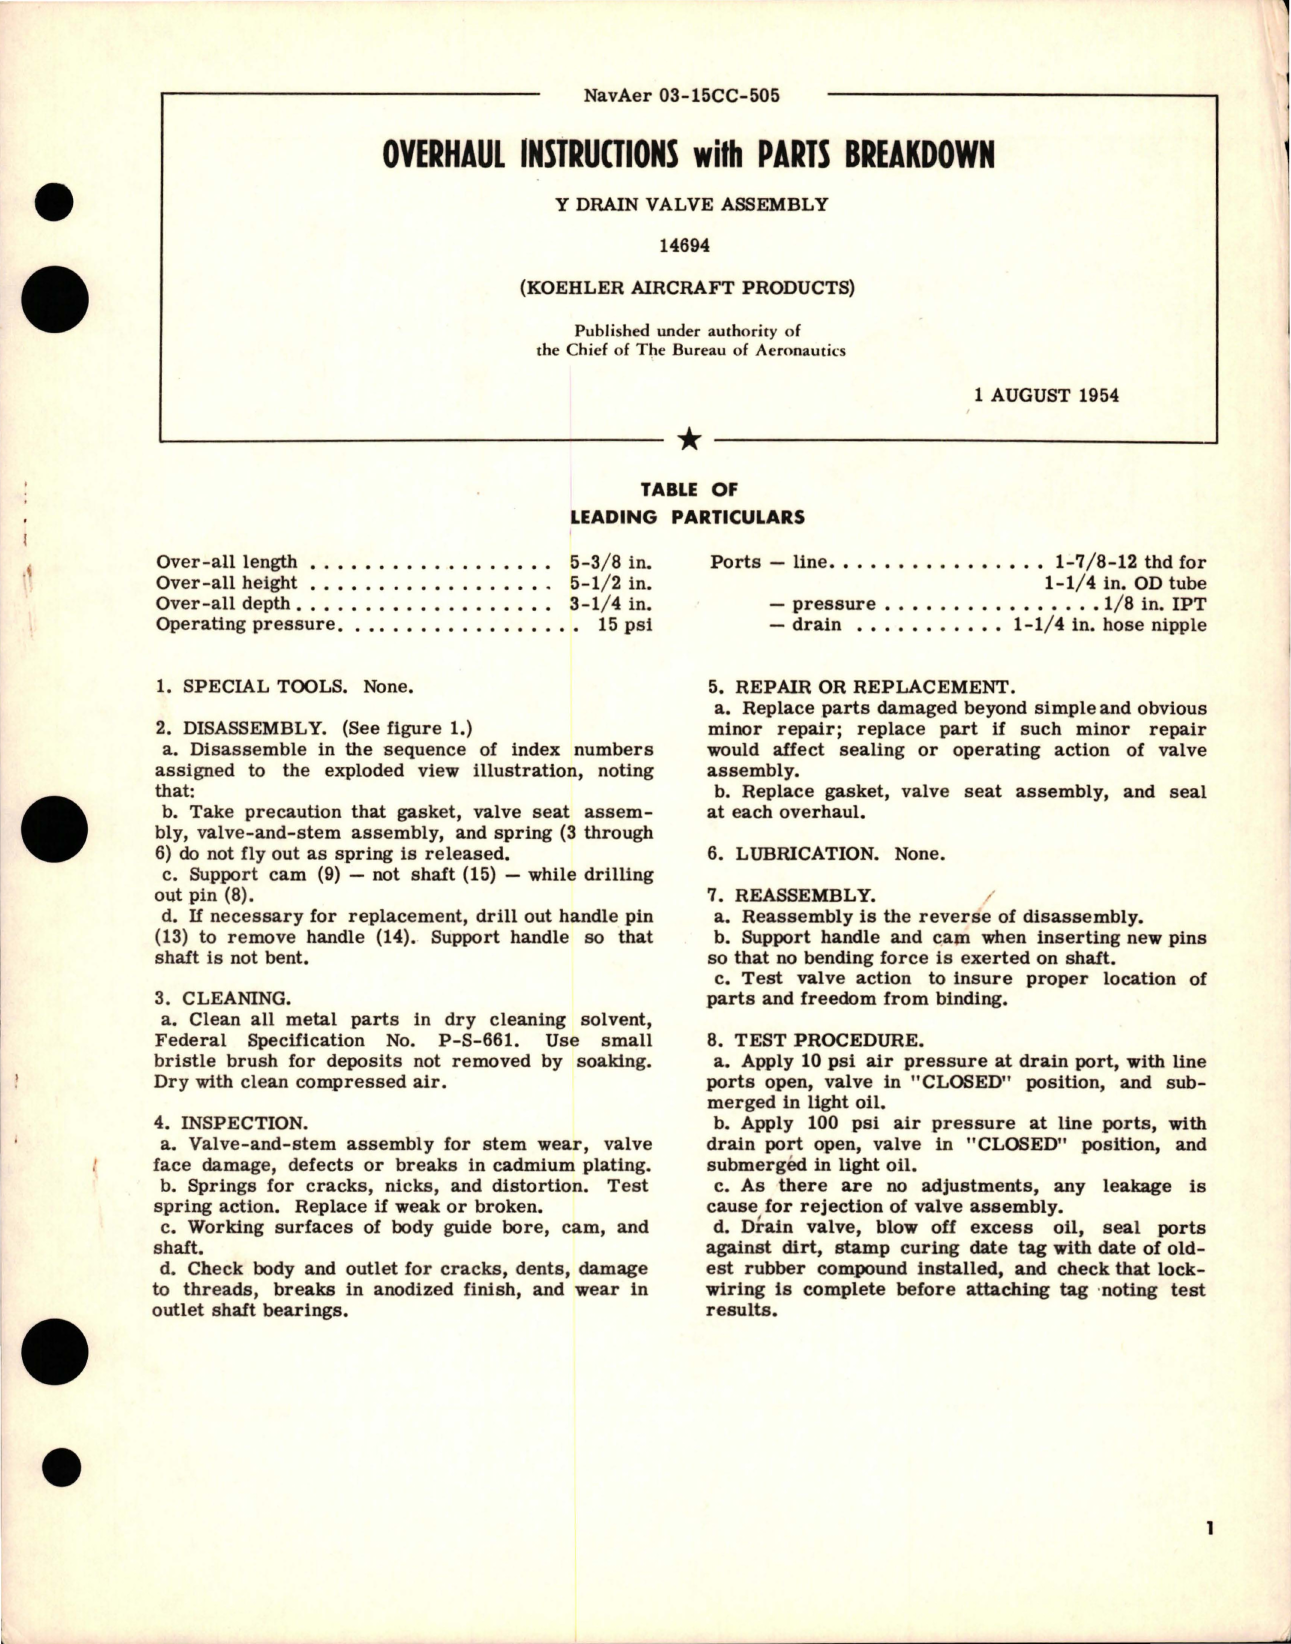 Sample page 1 from AirCorps Library document: Overhaul Instructions with Parts Breakdown for Y Drain Valve Assembly - 14694